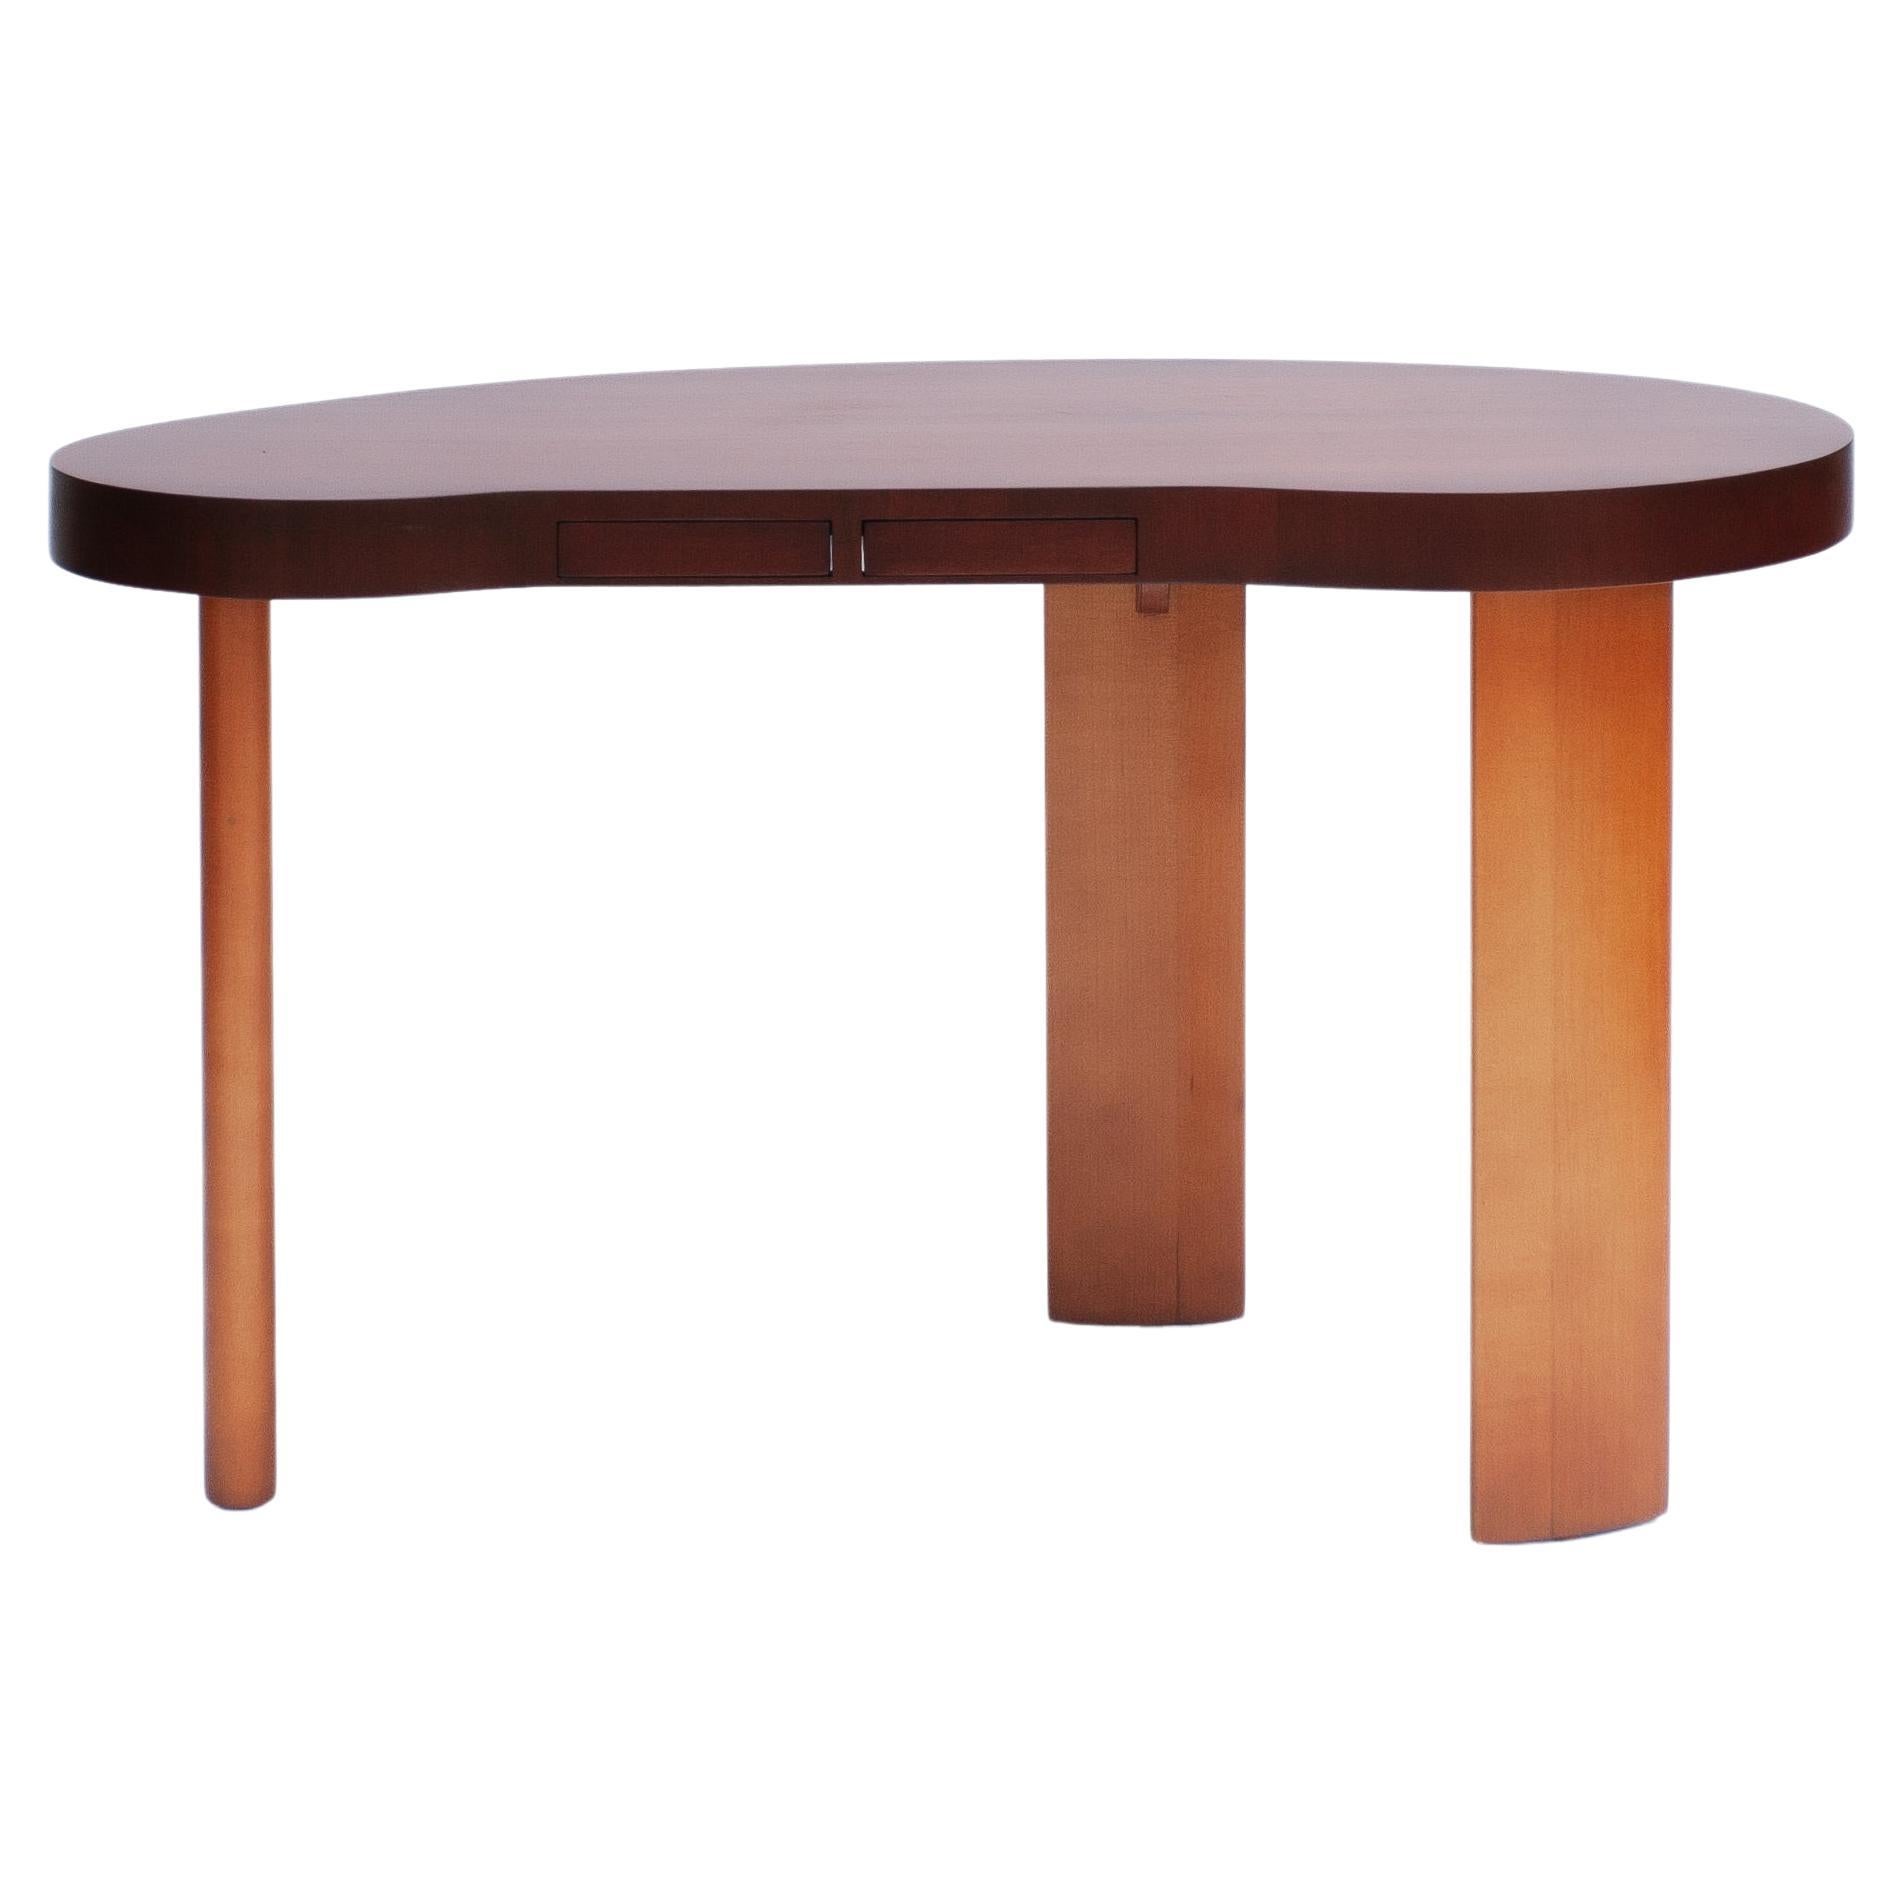 Paul Frankl, a renowned American designer of the 20th century, crafted a timeless masterpiece in collaboration with Johnson Furniture Company—a kidney-shaped desk that blends functionality with sophisticated appeal. Its curved lines and smooth